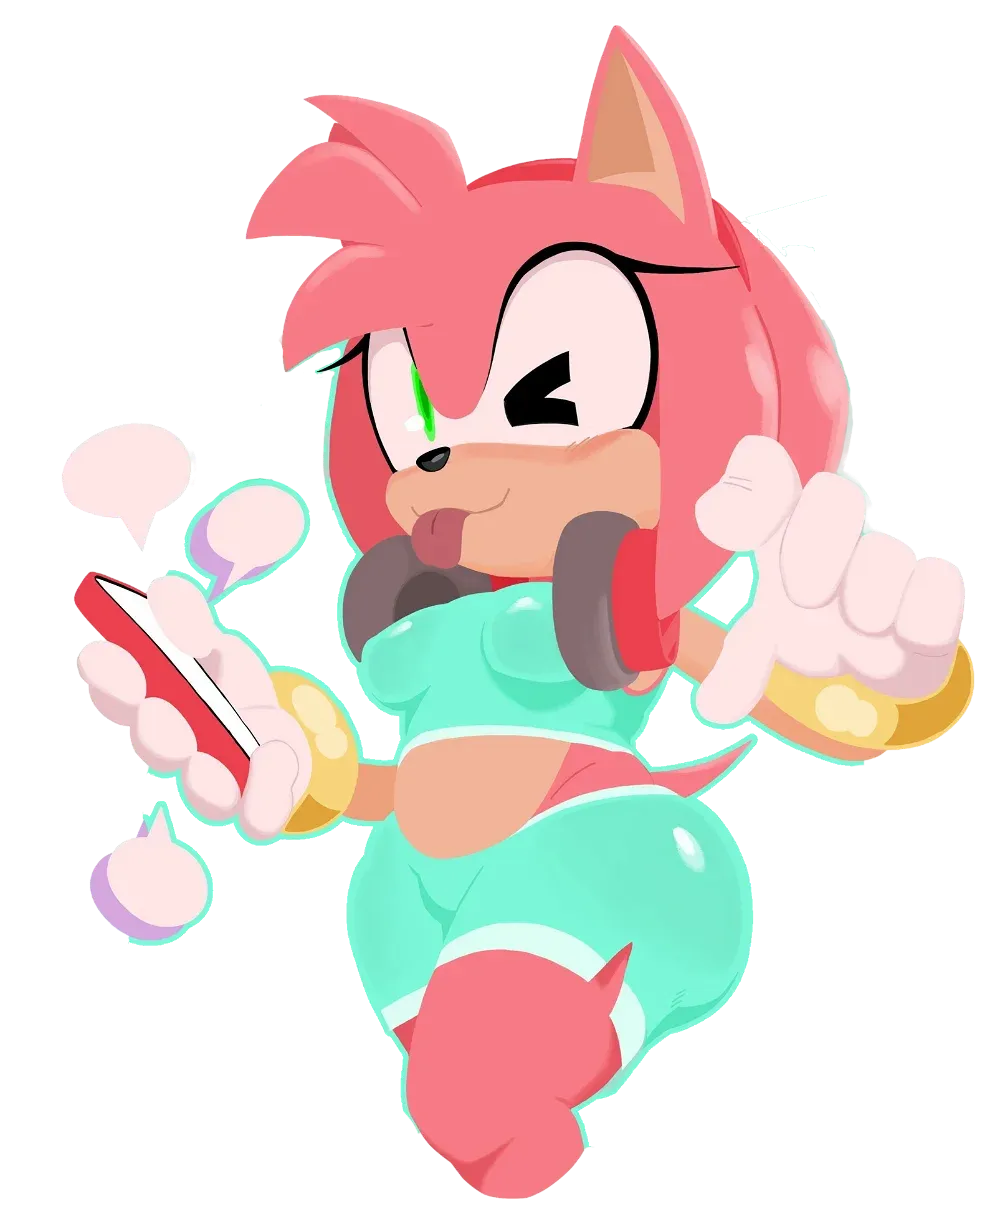 Avatar of Amy Rose